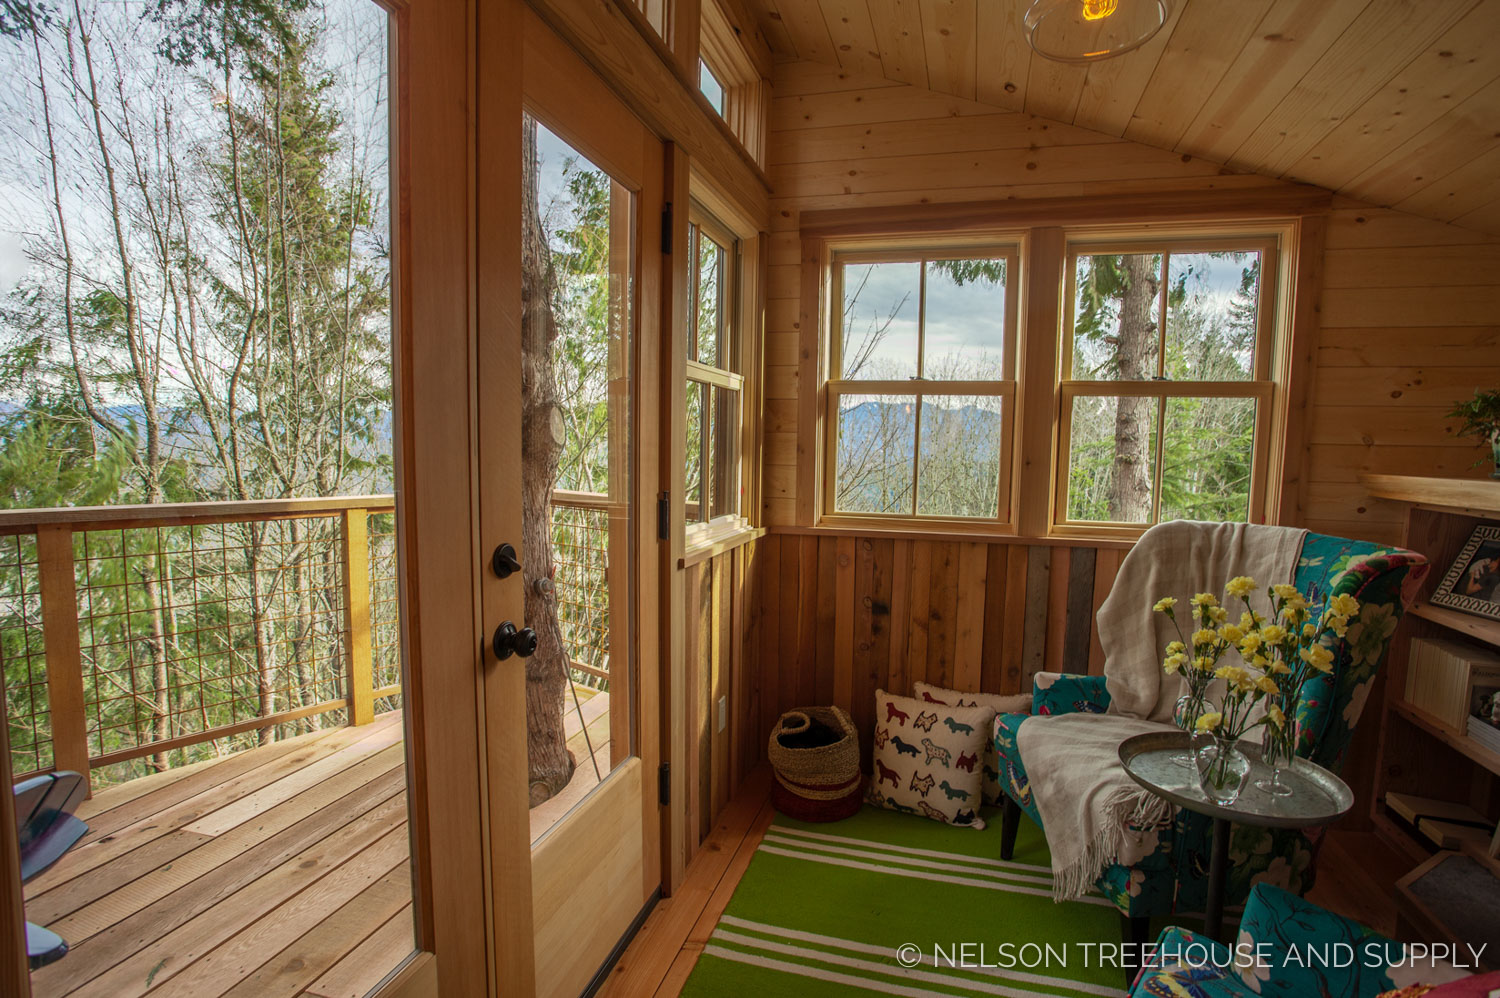  Bulldog Bungalow - views from inside - nelson Treehouse 